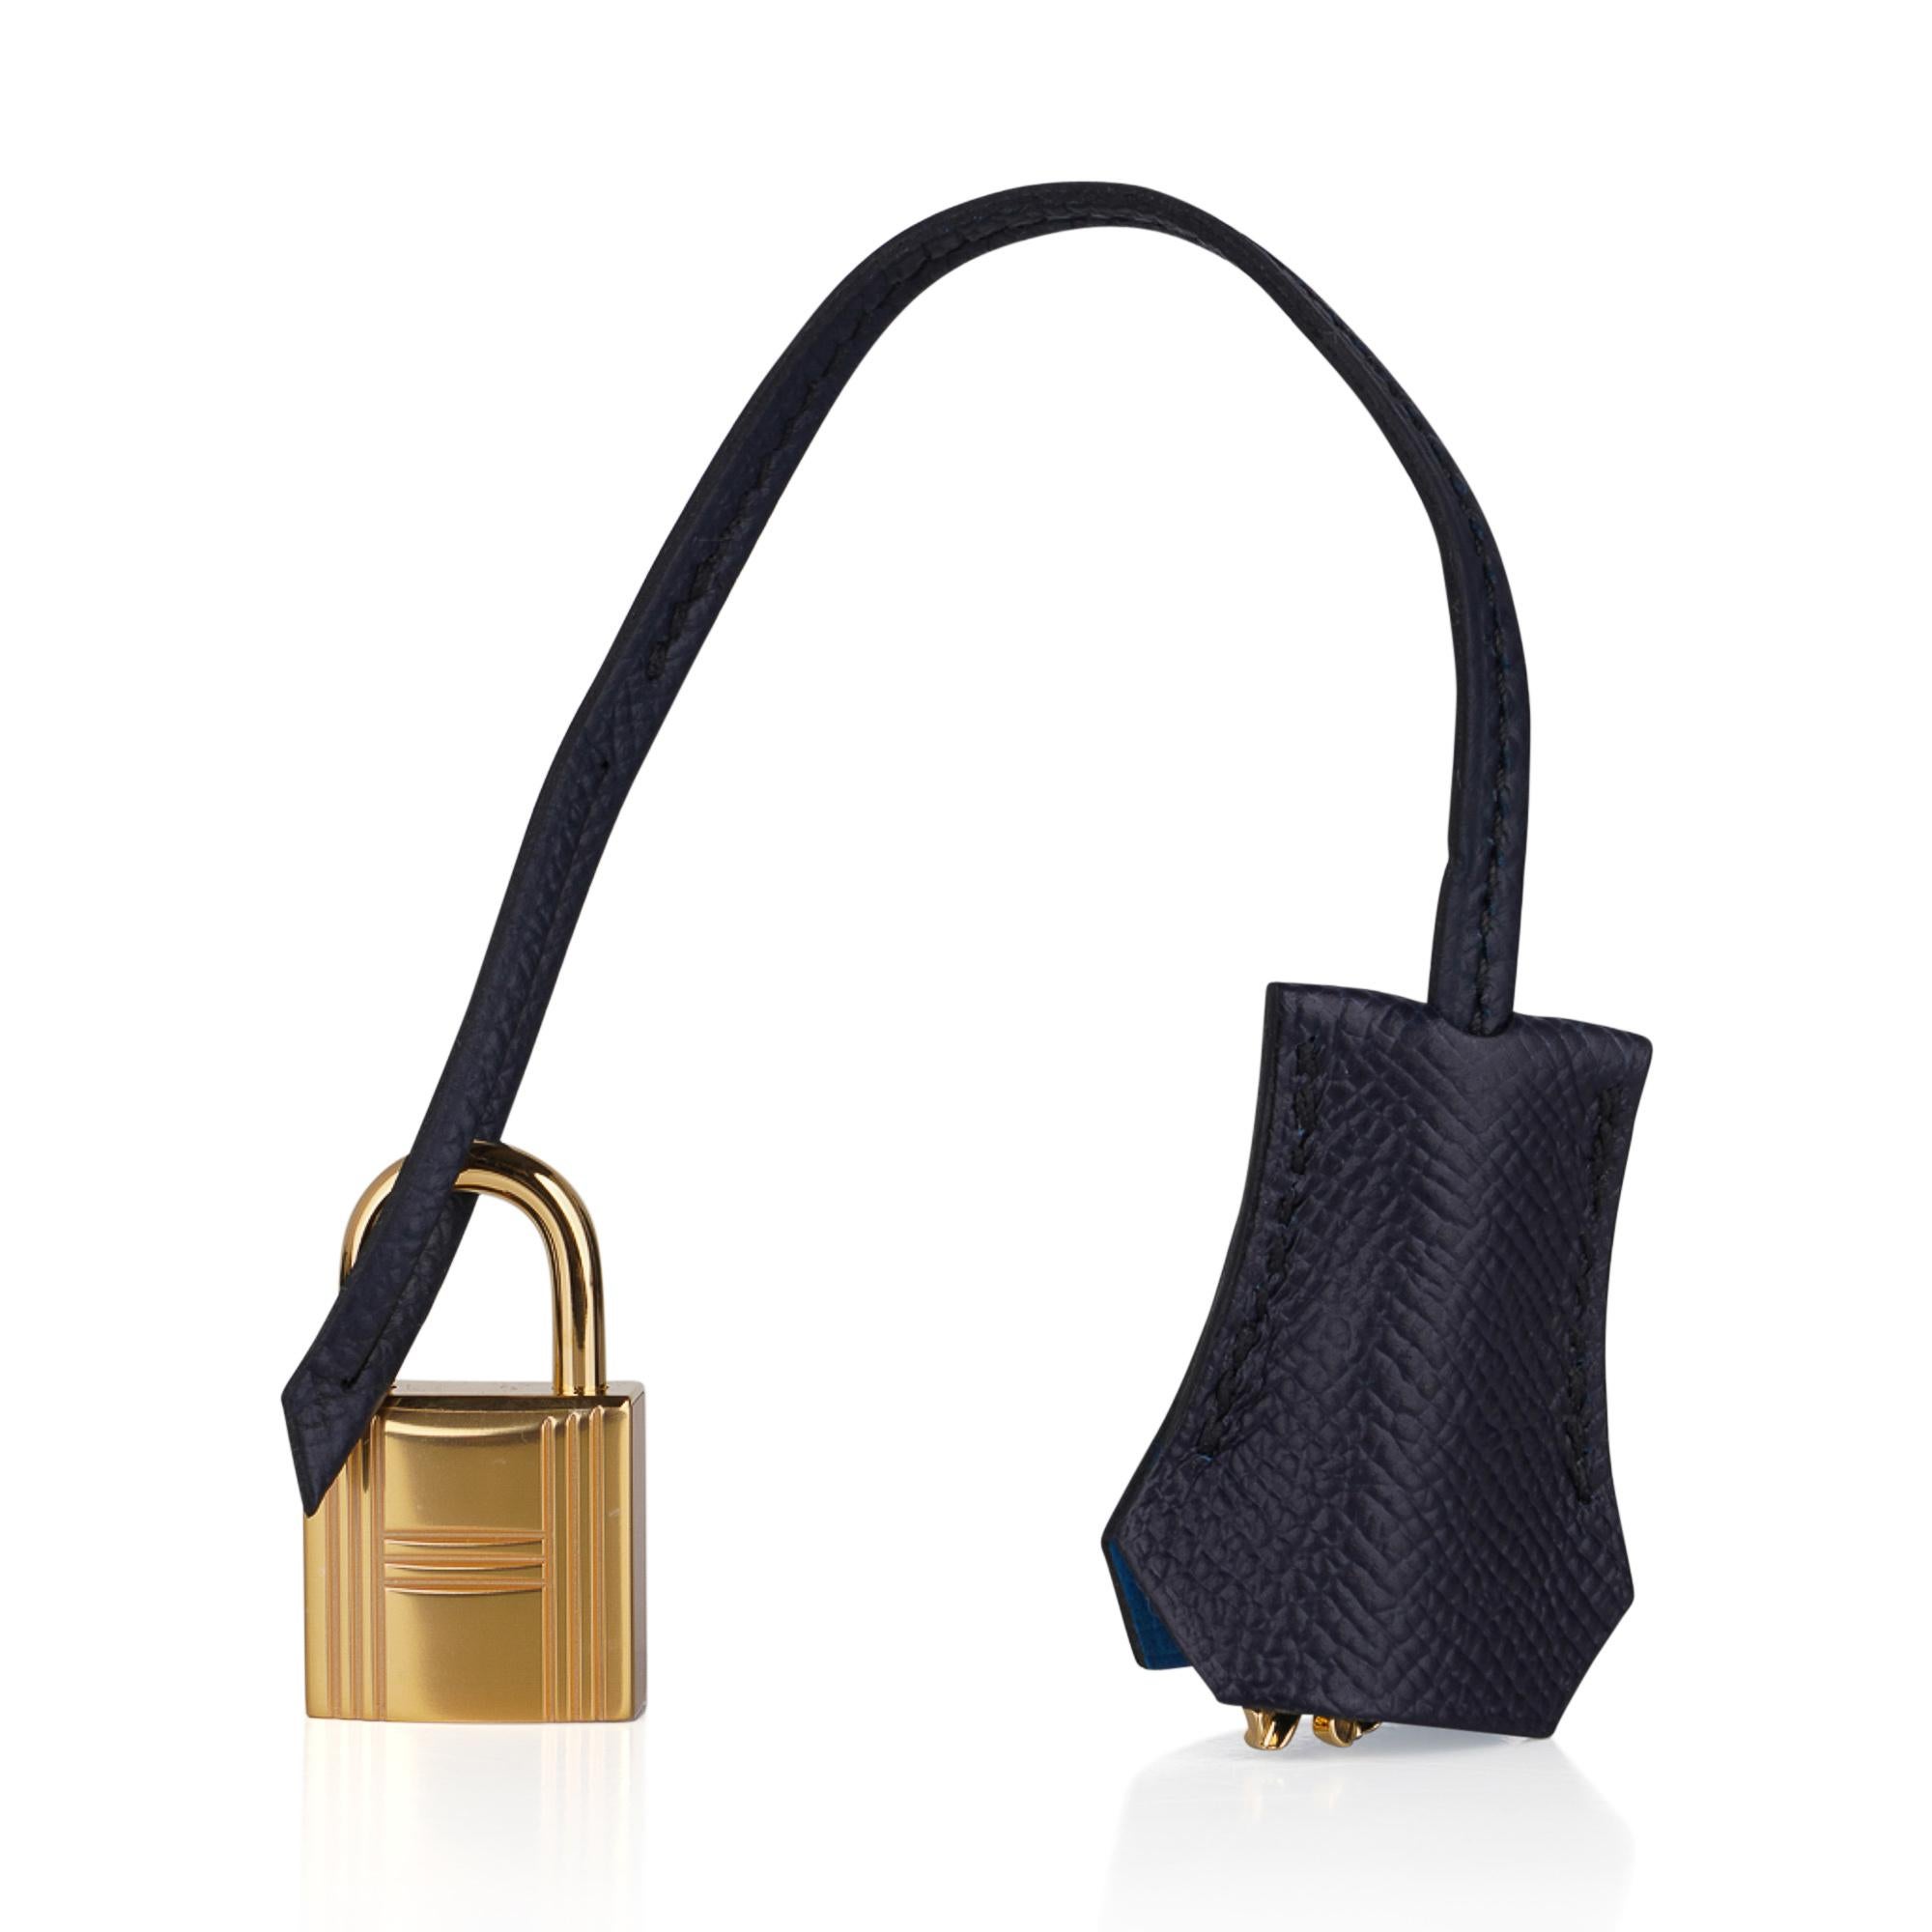 Mightychic offers a guaranteed authentic Hermes Kelly Sellier 28 Casaque tri-colour bag featured in Black and Blue Indigo.
Vivid Bleu Frida interior.
Beautiful and exotic, this epsom leather Hermes Kelly Sellier limited edition bag is perfect for